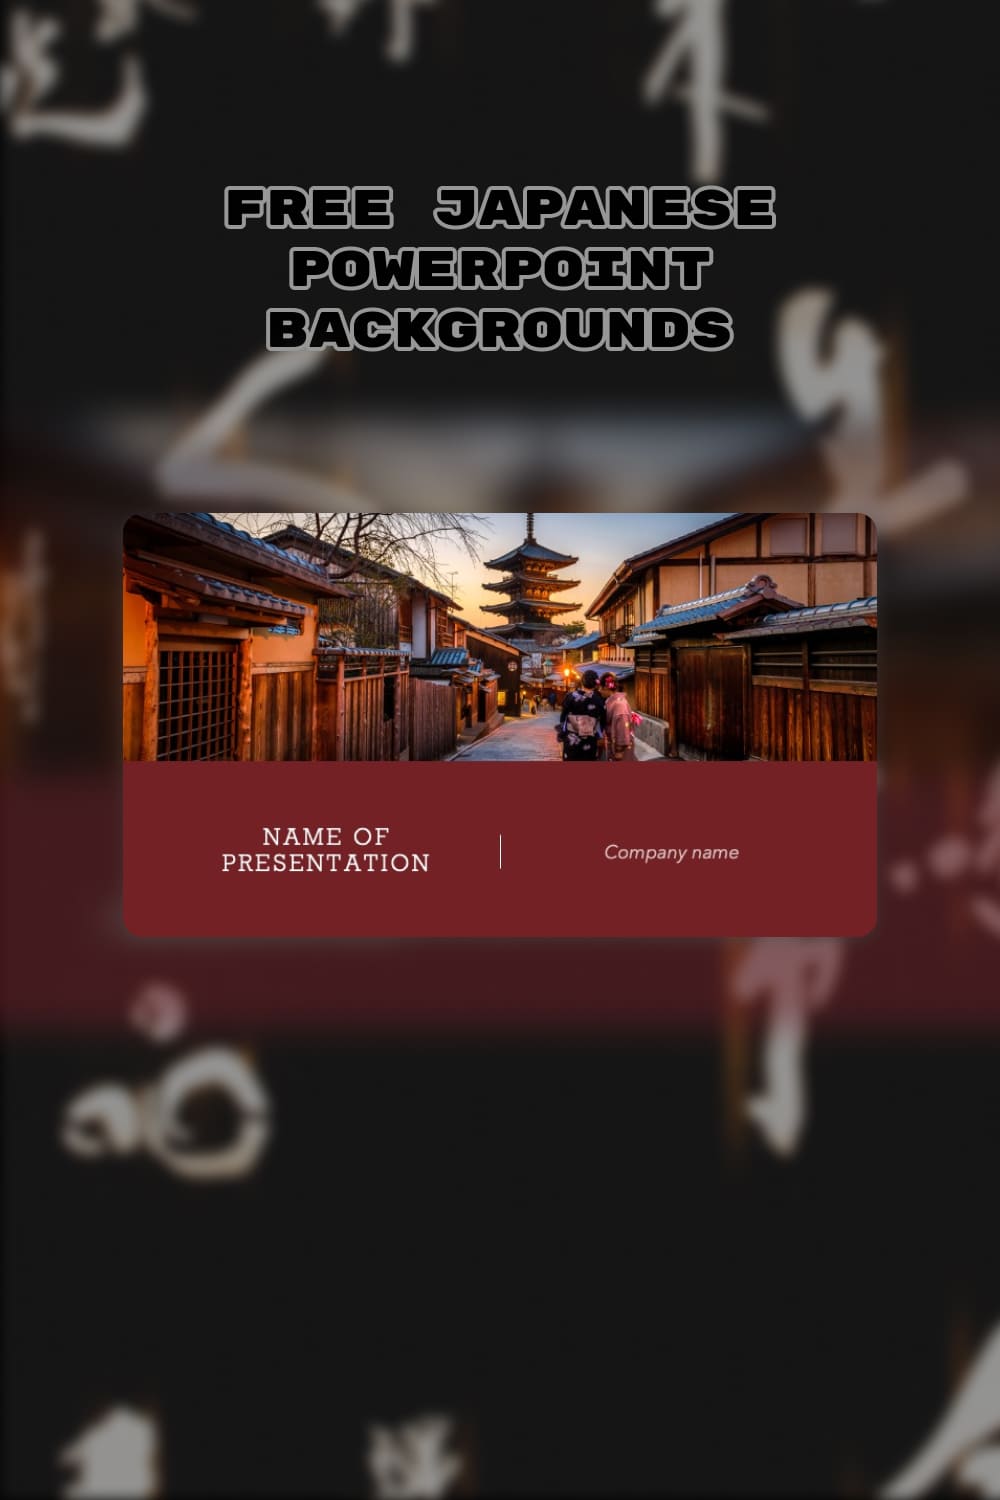 Pinterest Free Japanese Powerpoint Backgrounds.